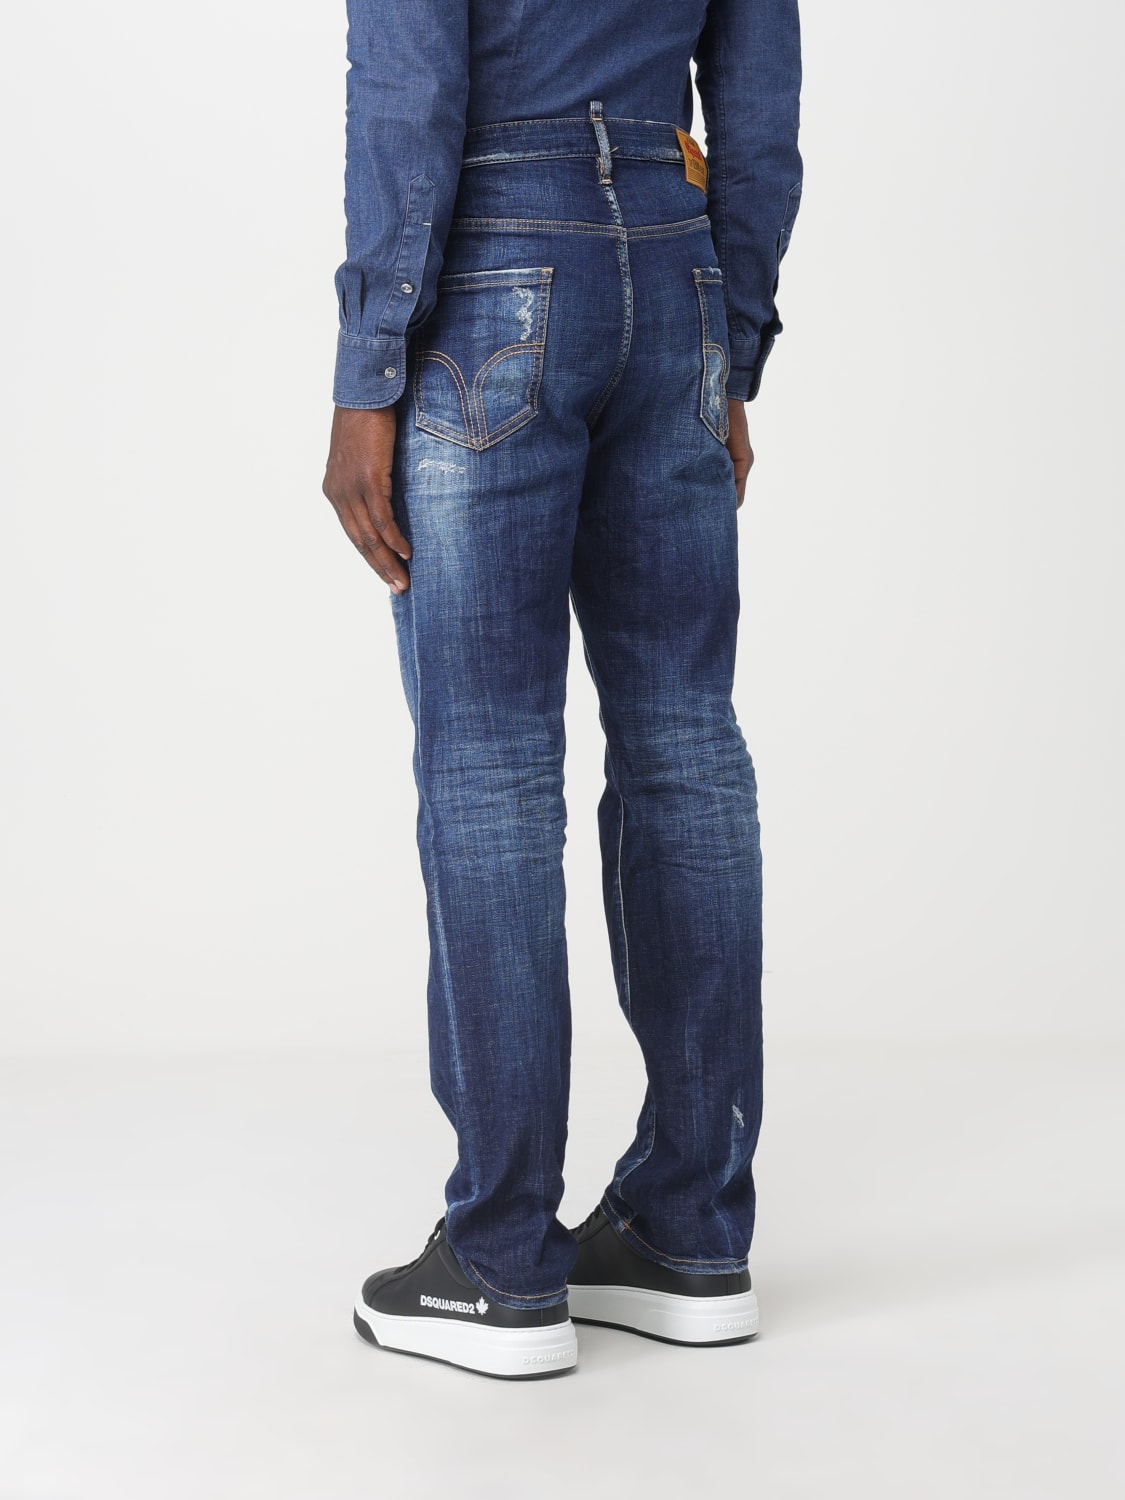 Replay Jeans for Men - Vestiaire Collective